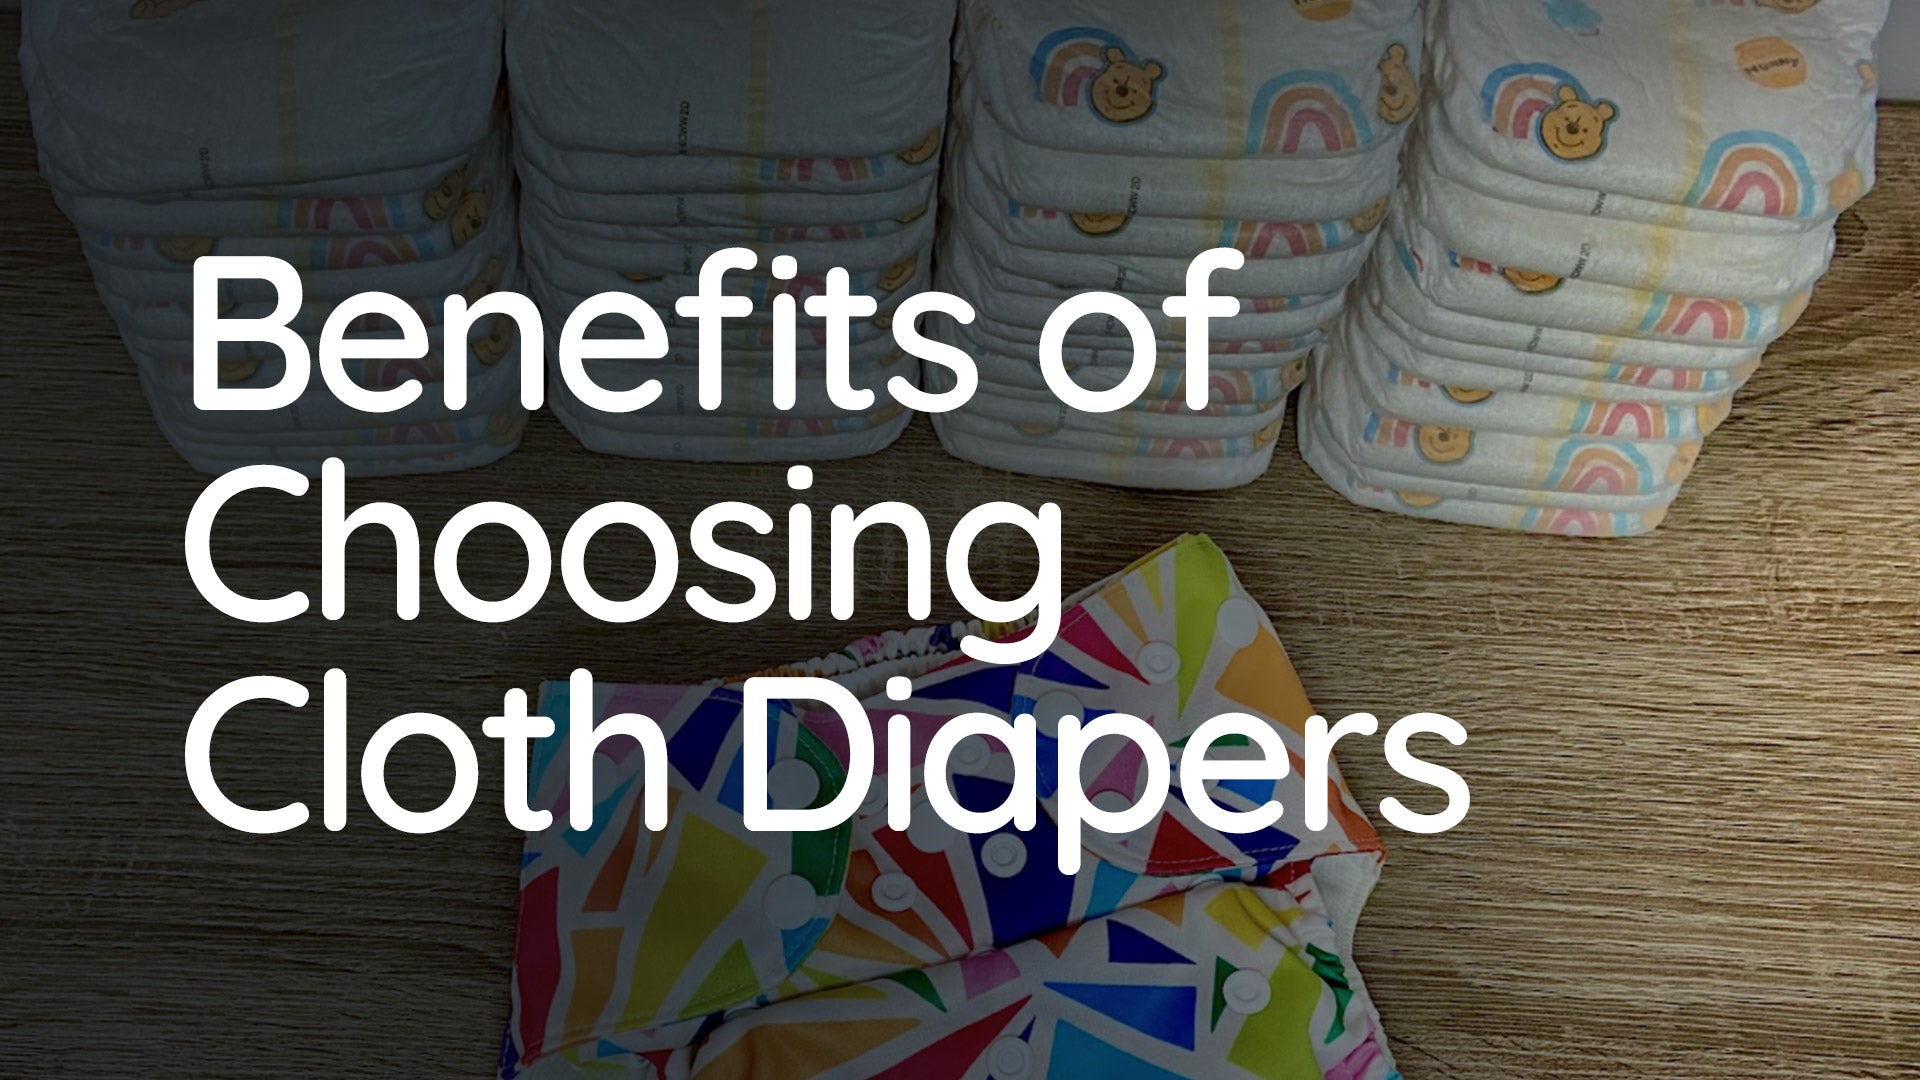 The Benefits of Choosing Cloth Diapers for Your New Baby with Cloth Diapering Mom Stefanie